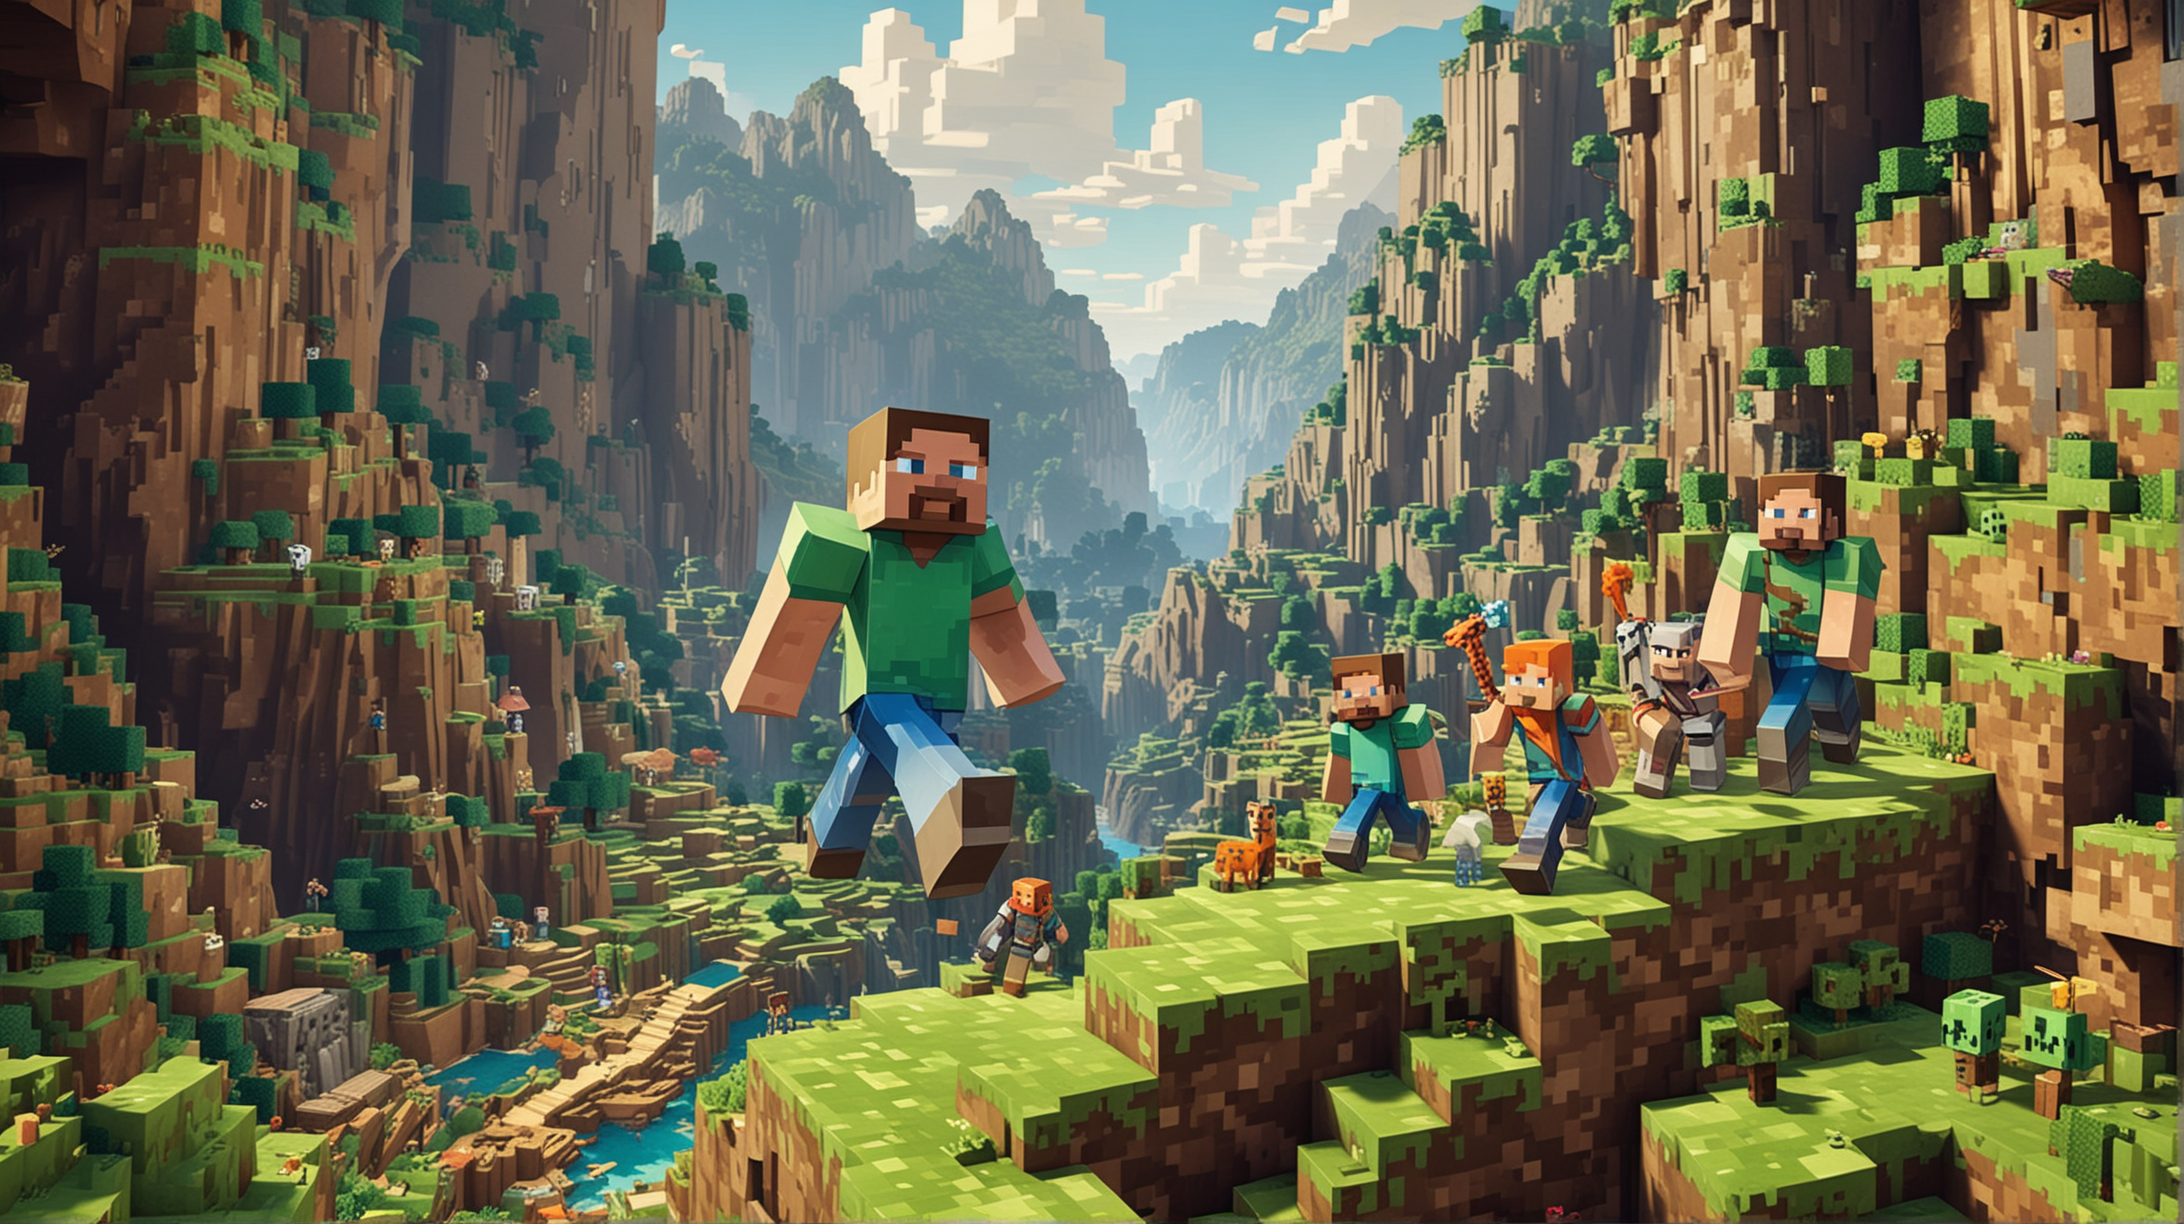 Generate an image featuring iconic Minecraft characters in an adventurous scene. Incorporate well-known figures such as Steve, Alex, creepers, and villagers. Set the backdrop in a dynamic environment, perhaps a bustling village, a perilous cave, or atop a towering mountain. Ensure the characters are engaged in an activity or scenario that captures the essence of Minecraft's exploration and creativity. Let your imagination run wild as you craft a vivid portrayal of the beloved Minecraft universe